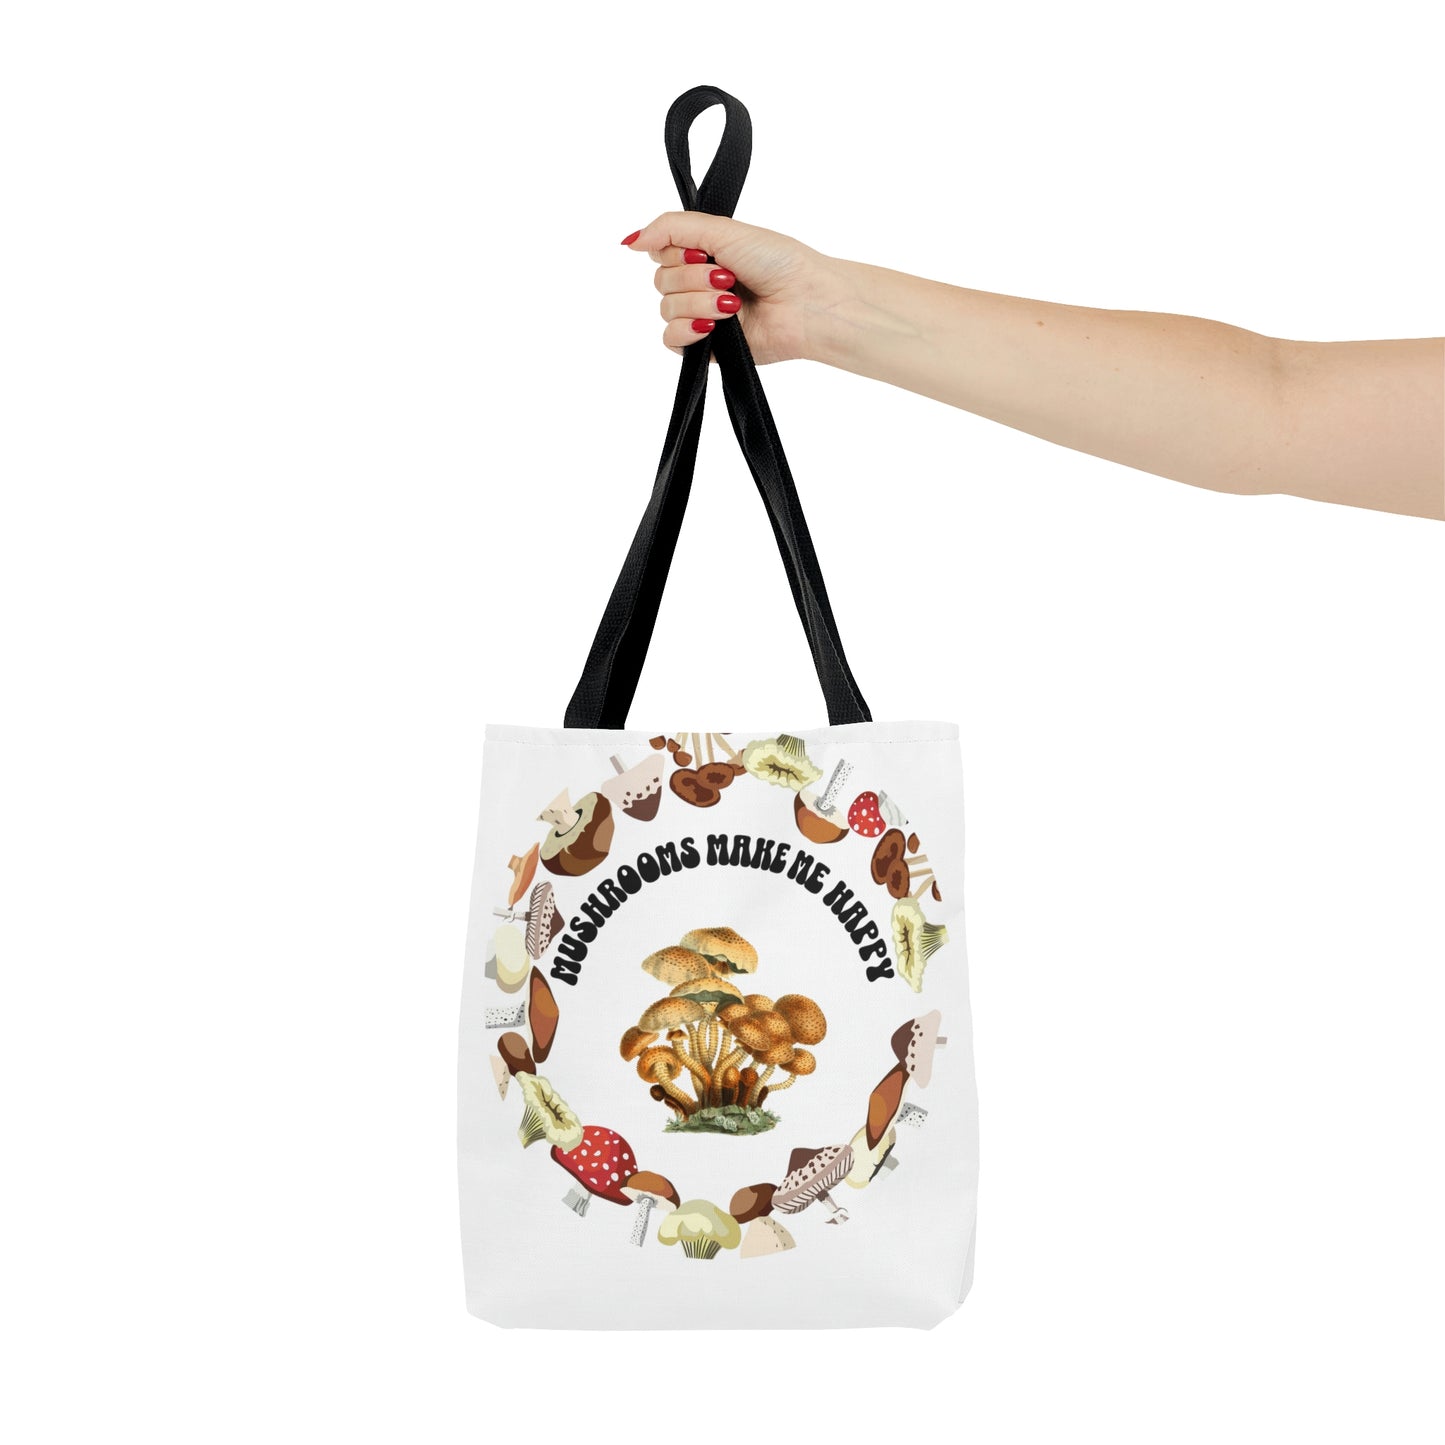 Mushrooms Make Me Happy Tote Bag, High Quality, All-Over Print Tote Bag, Mushrooms, Boho and Hippie Style